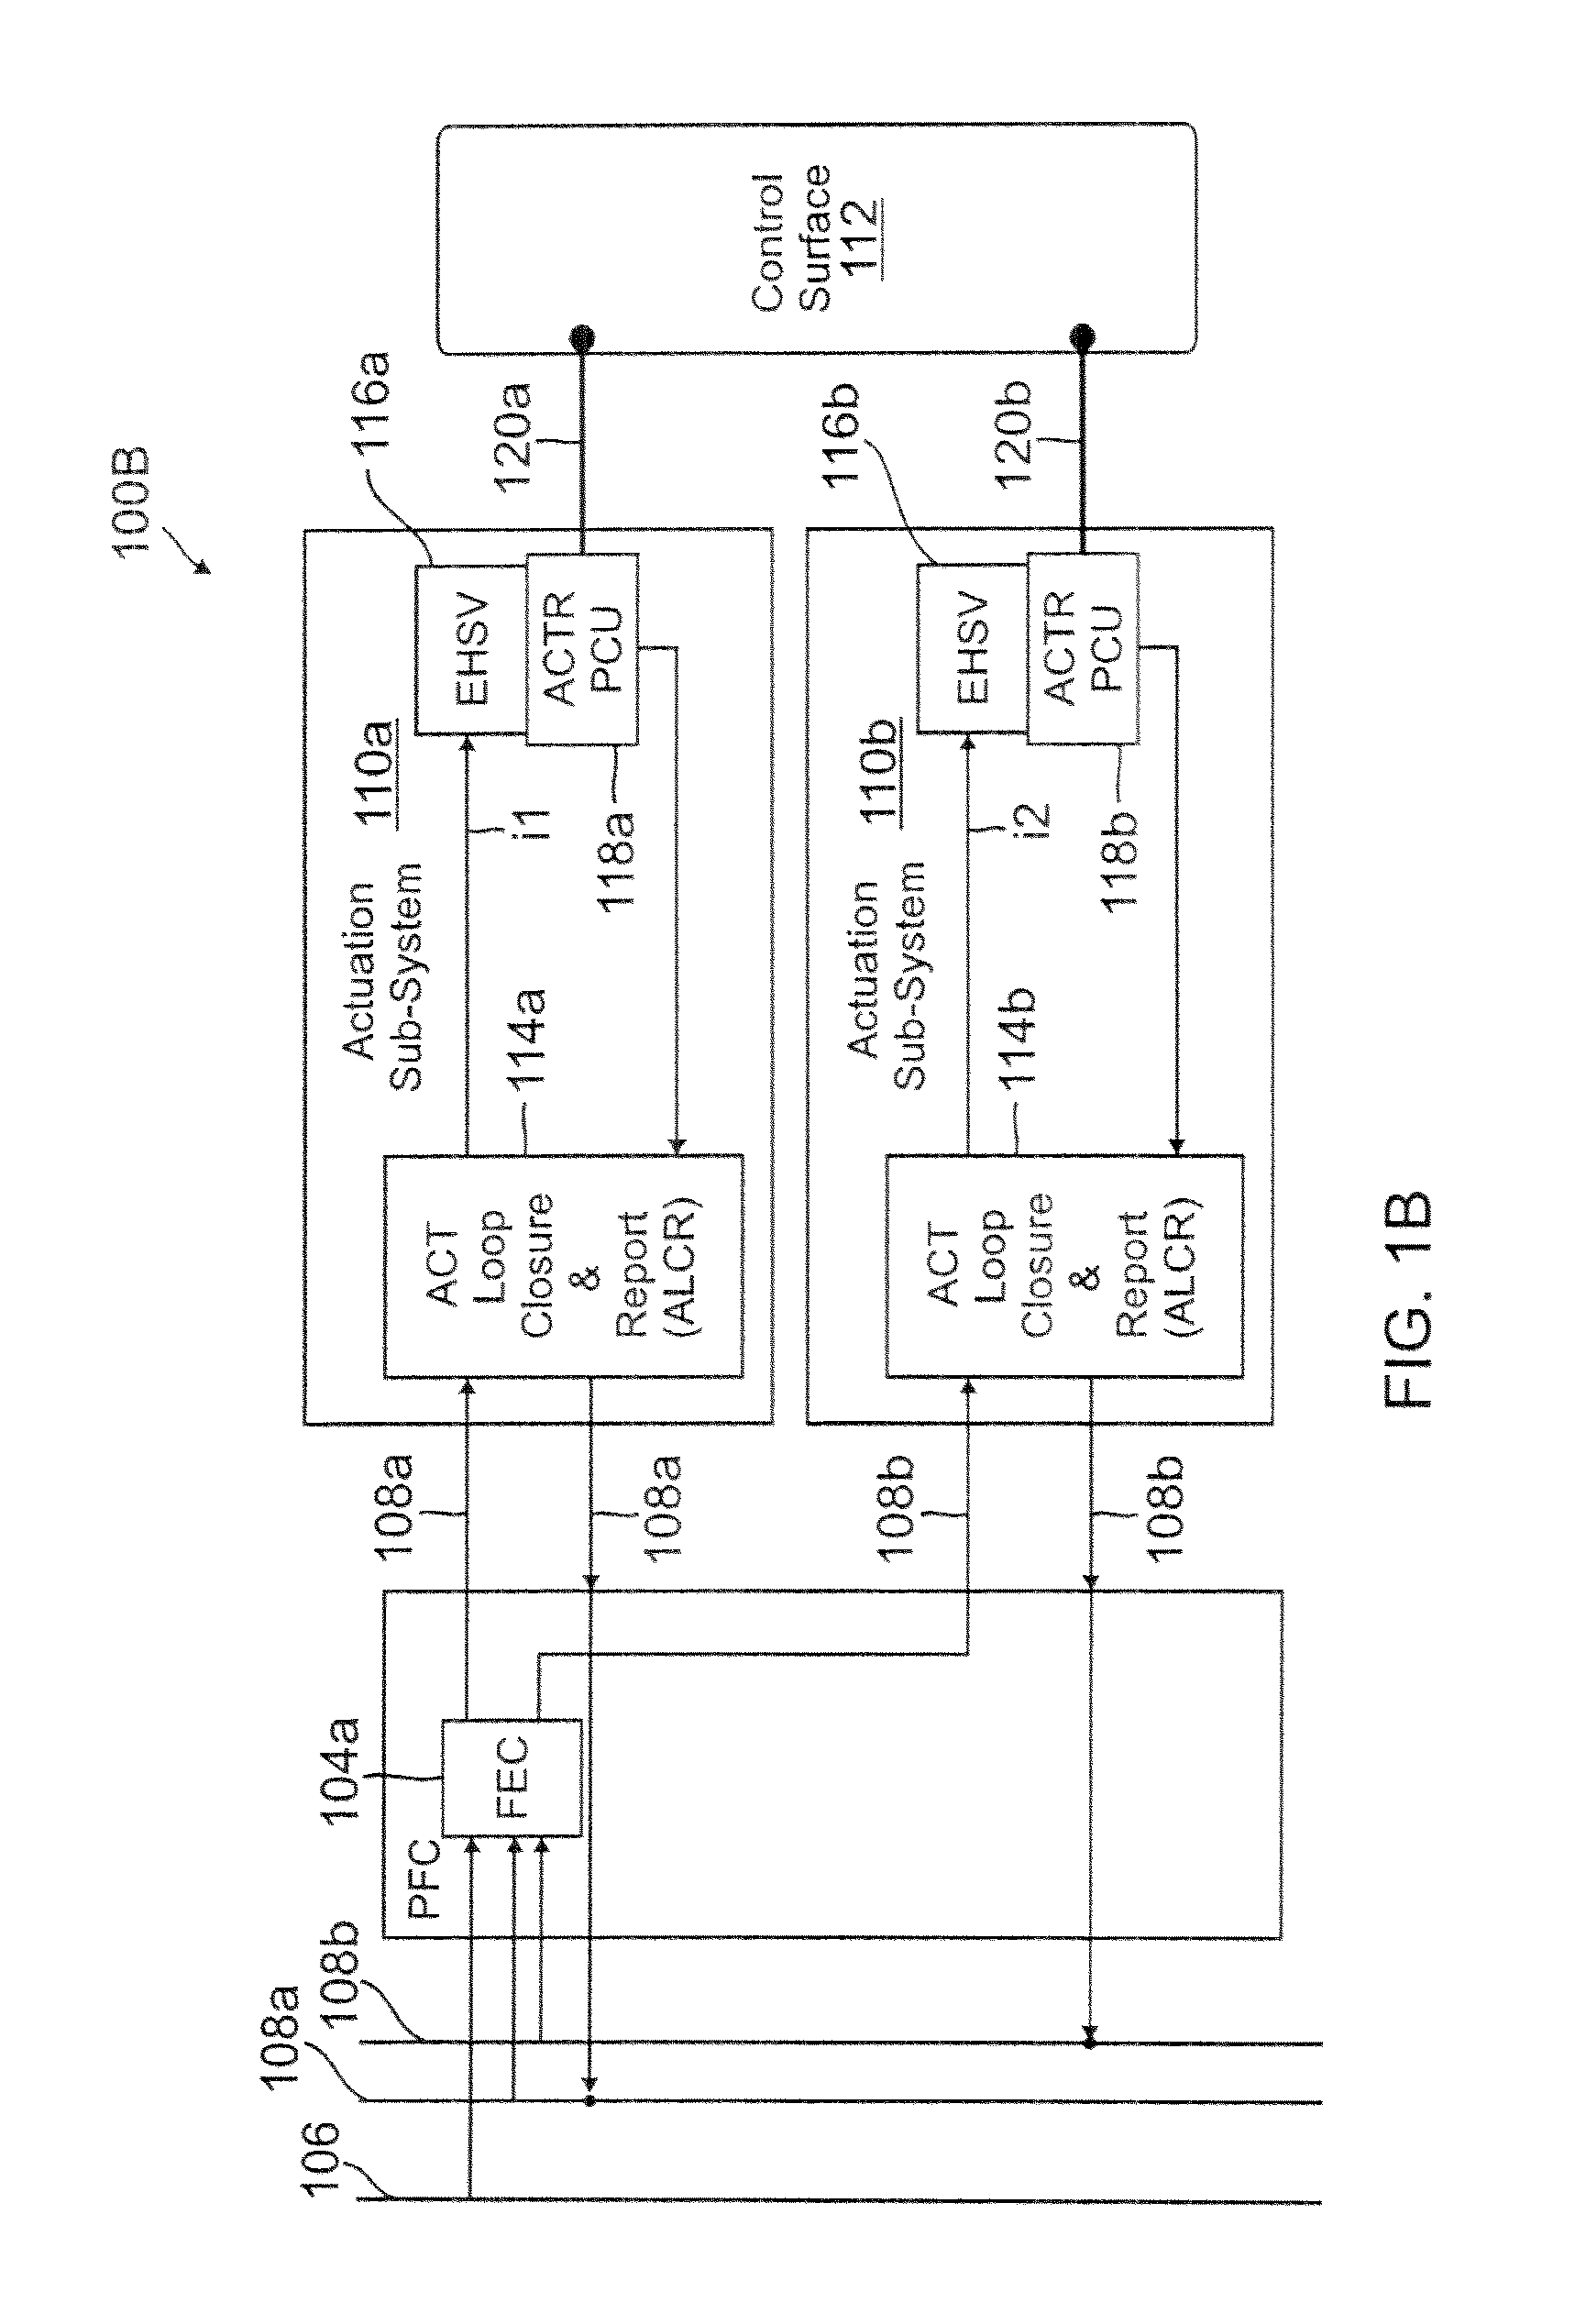 Actuator force equalization controller